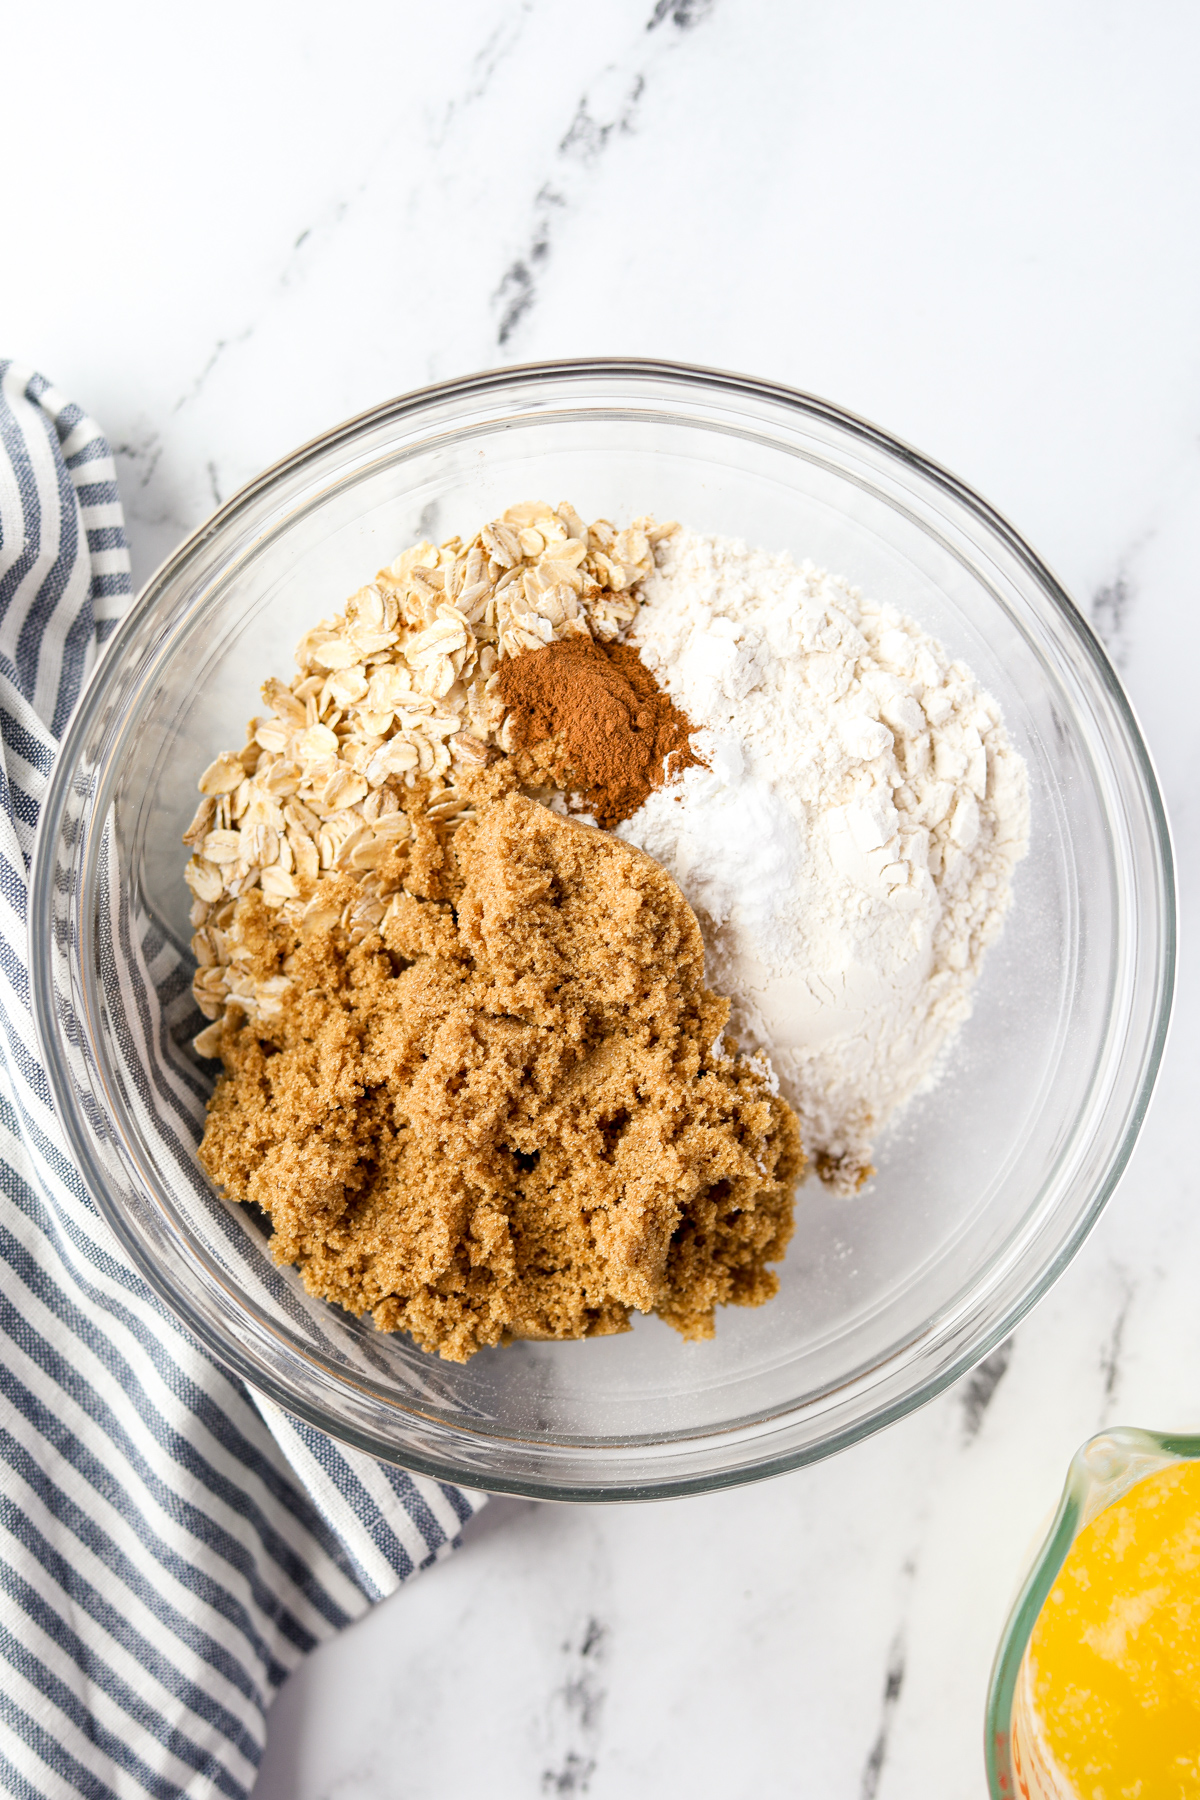 A bowl of dry ingredients: flour, oats, brown sugar, and cinnamon.